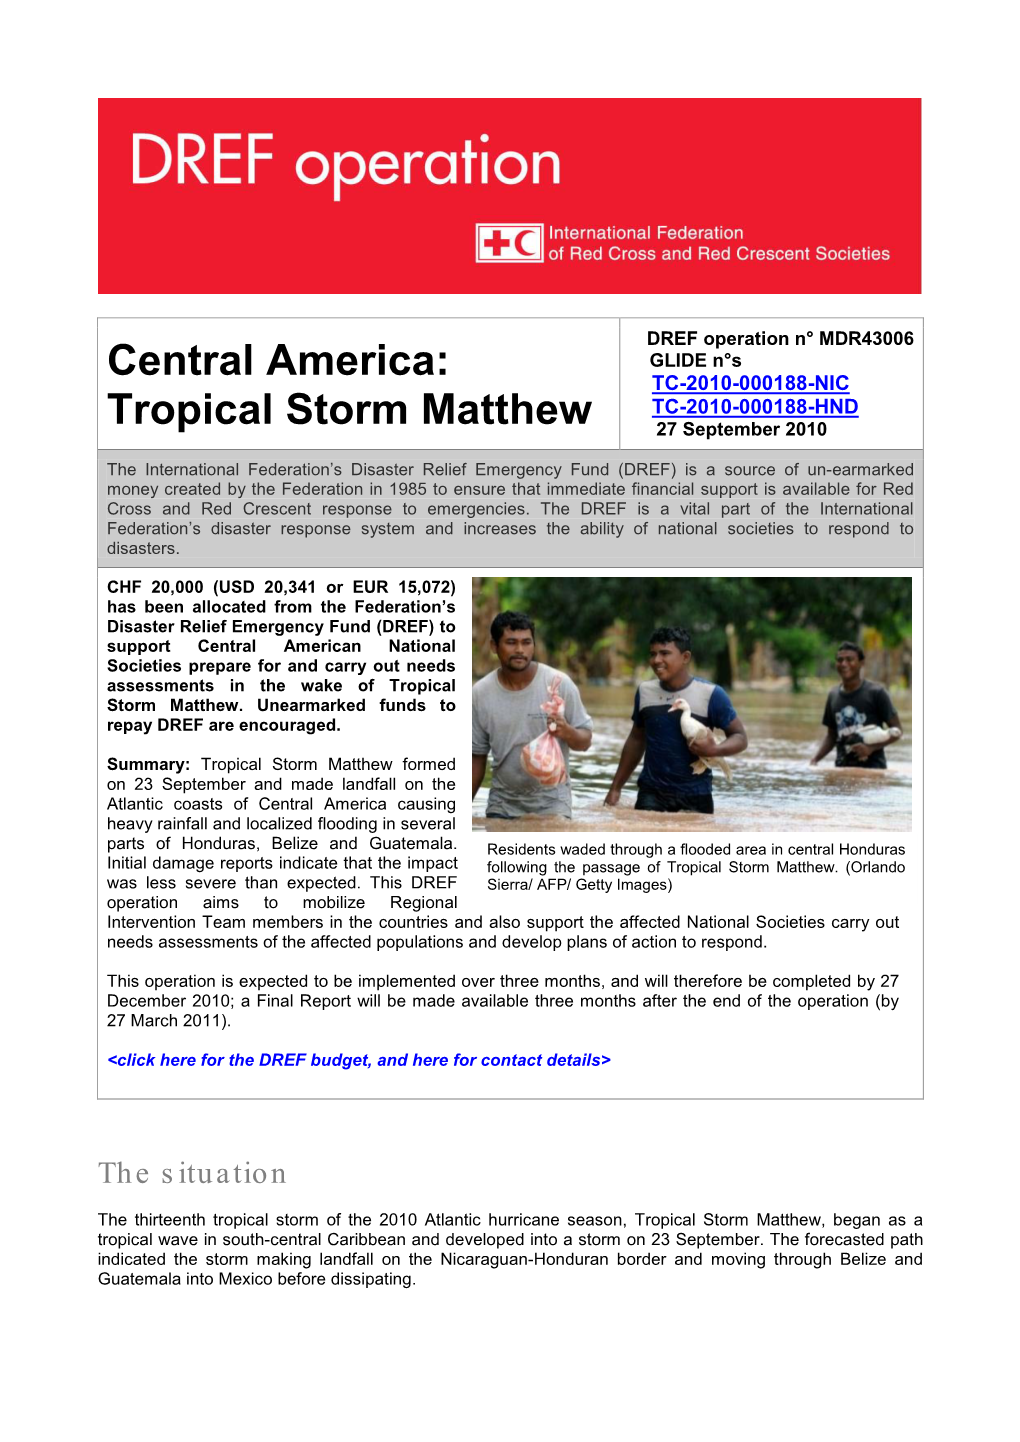 Central America: Tropical Storm Matthew